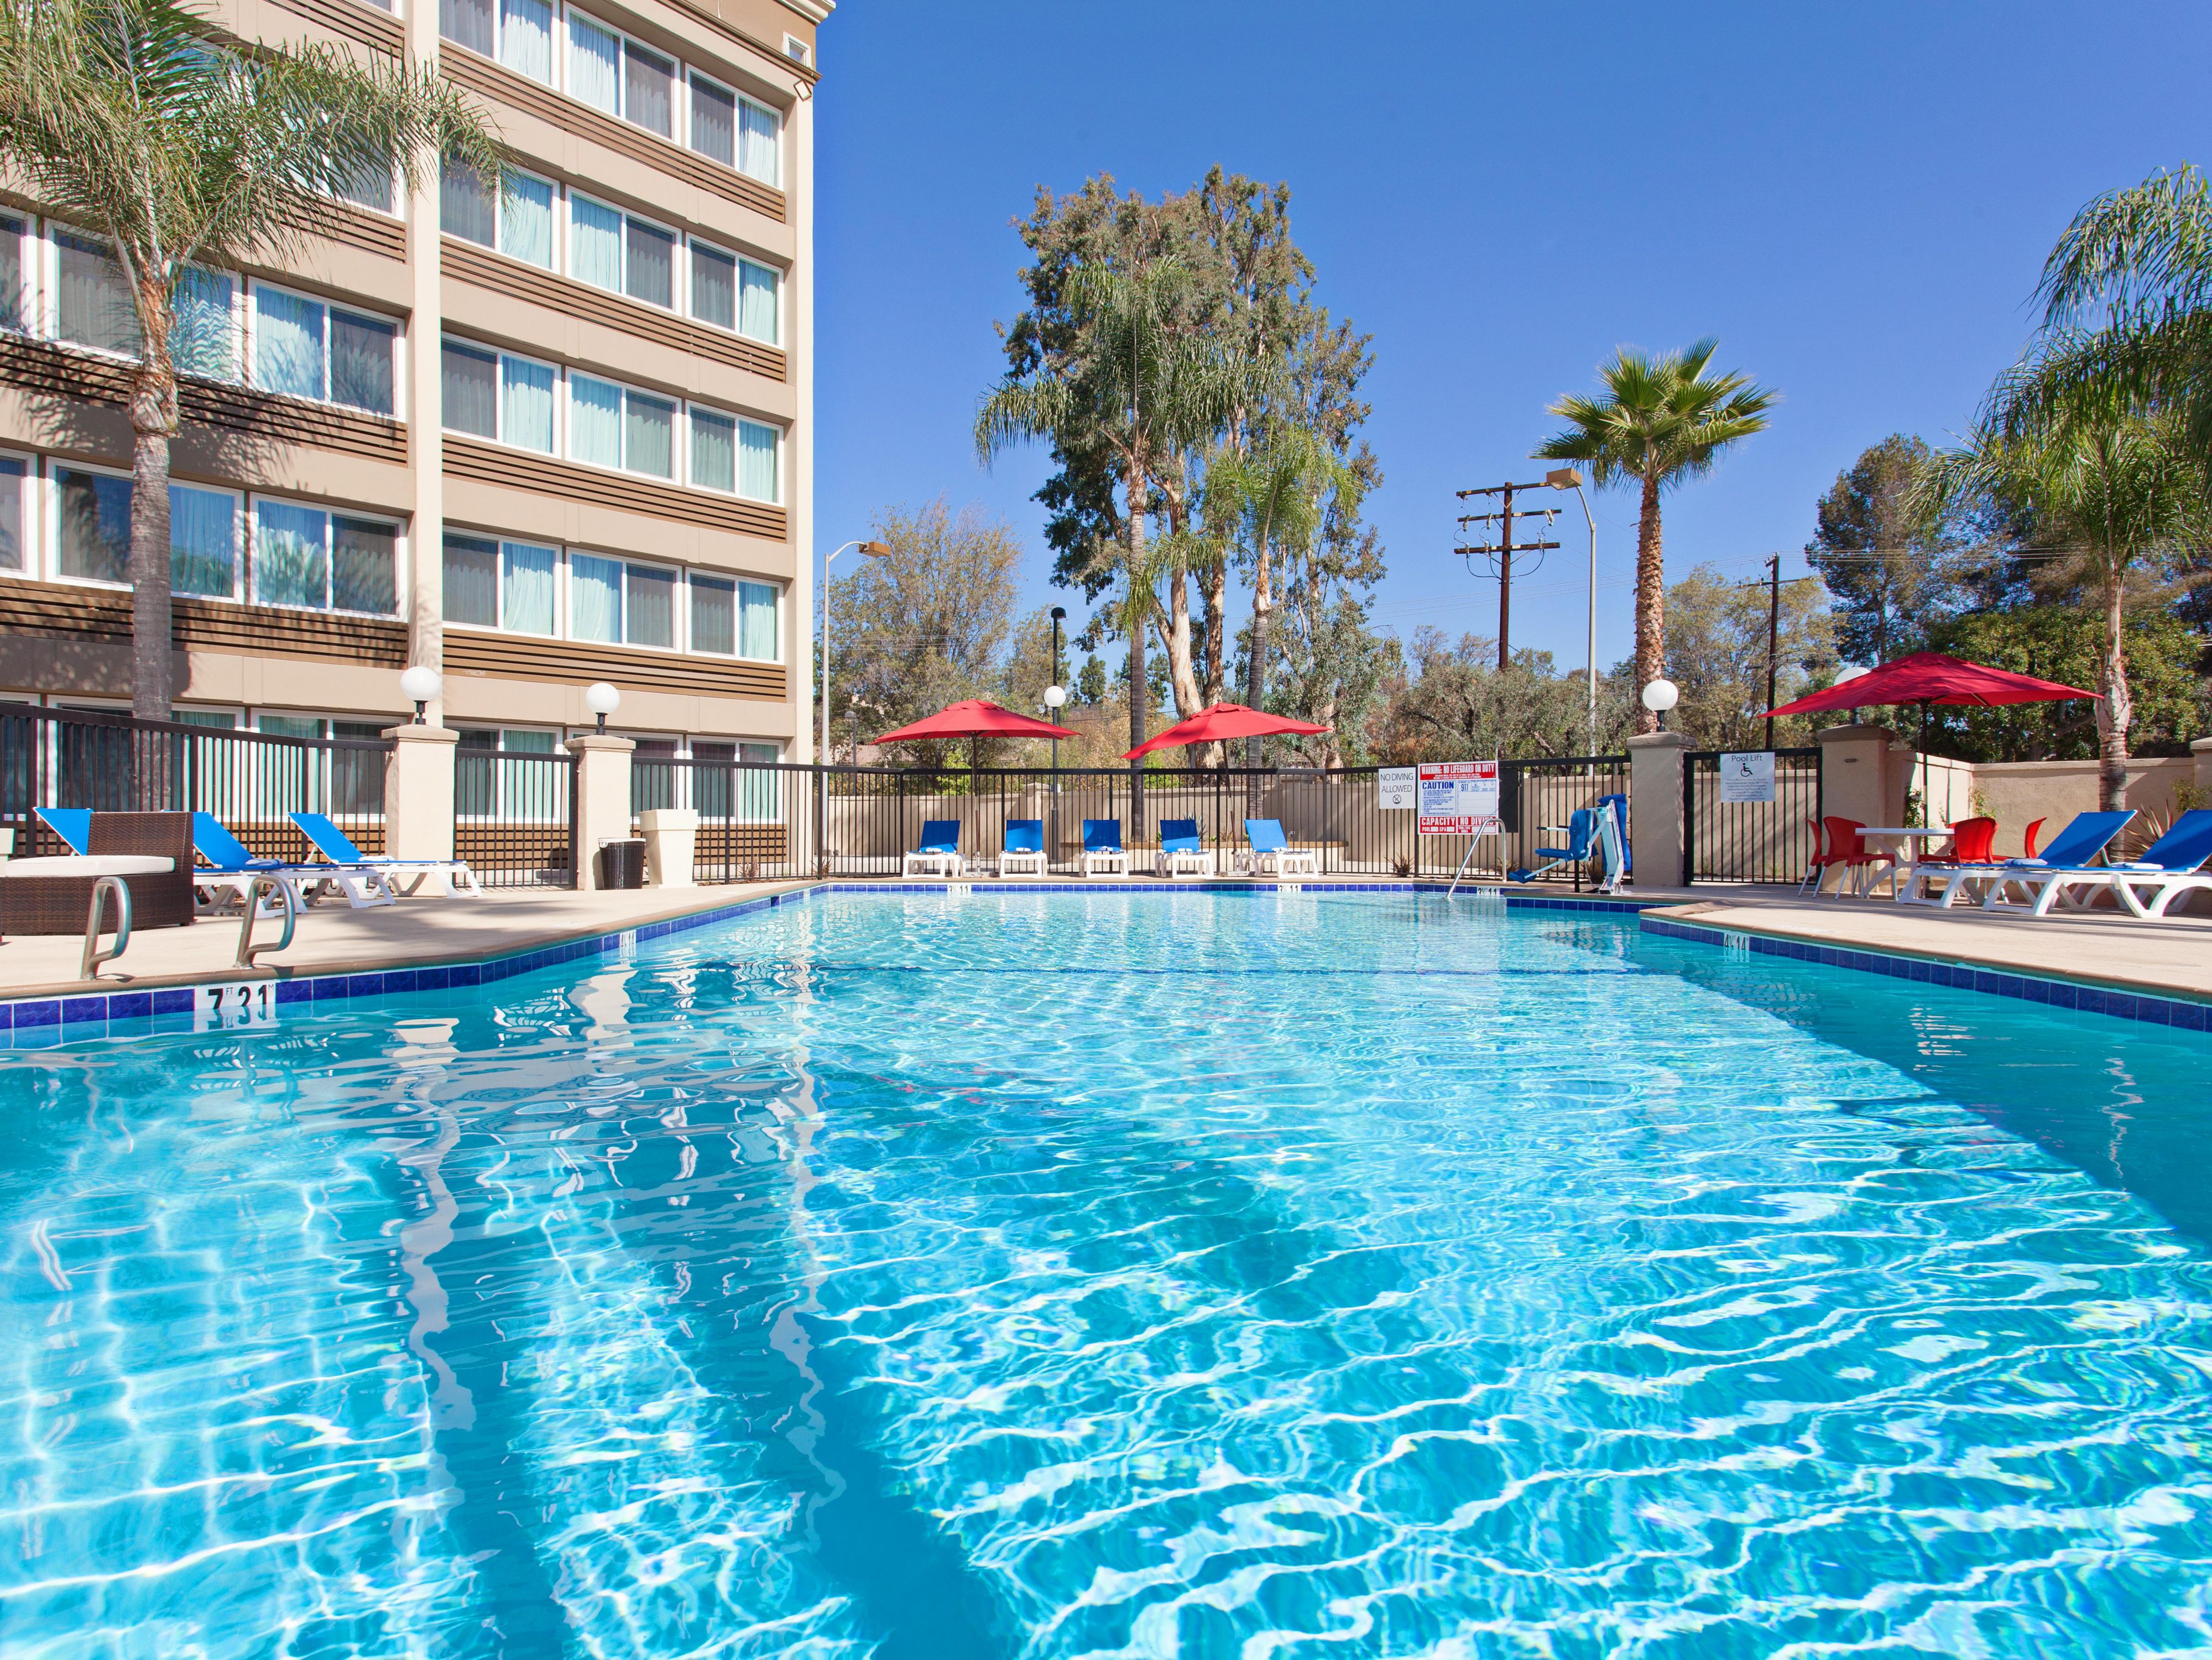 Looking to beat the Southern California heat? Just trying to get your daily laps in? Visit our on-site heated pool open daily. 